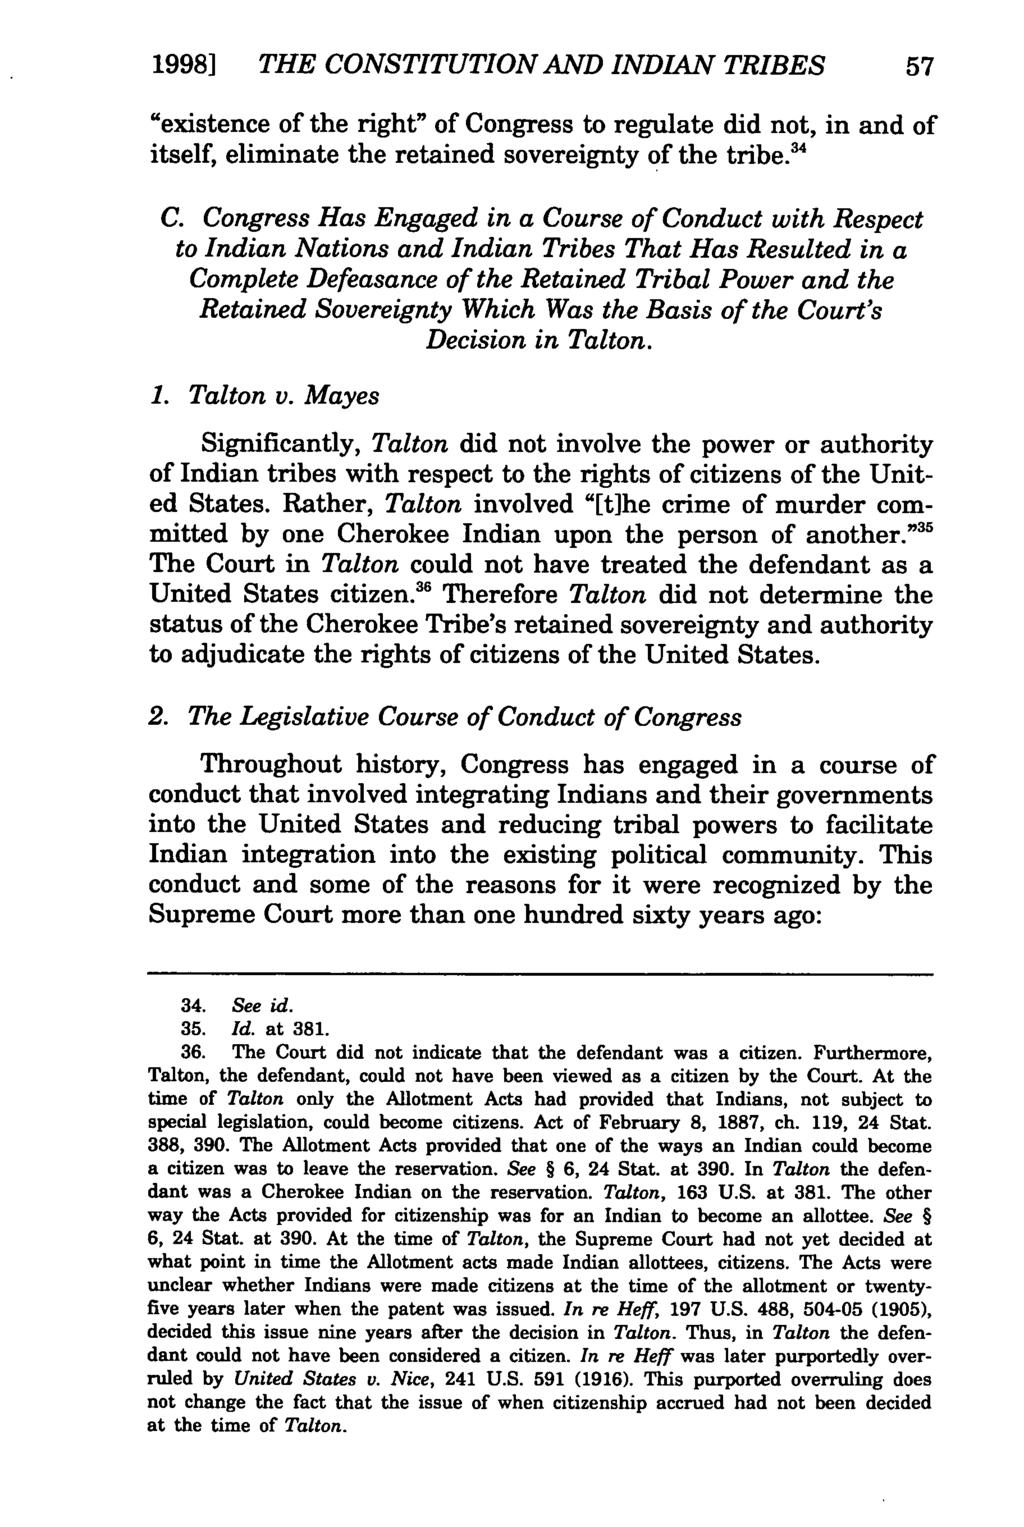 1998] Poore: The THE Constitution CONSTITUTION of the United States AND Applies INDIAN to Indian TRIBES Tribes 57 "existence of the right" of Congress to regulate did not, in and of itself, eliminate